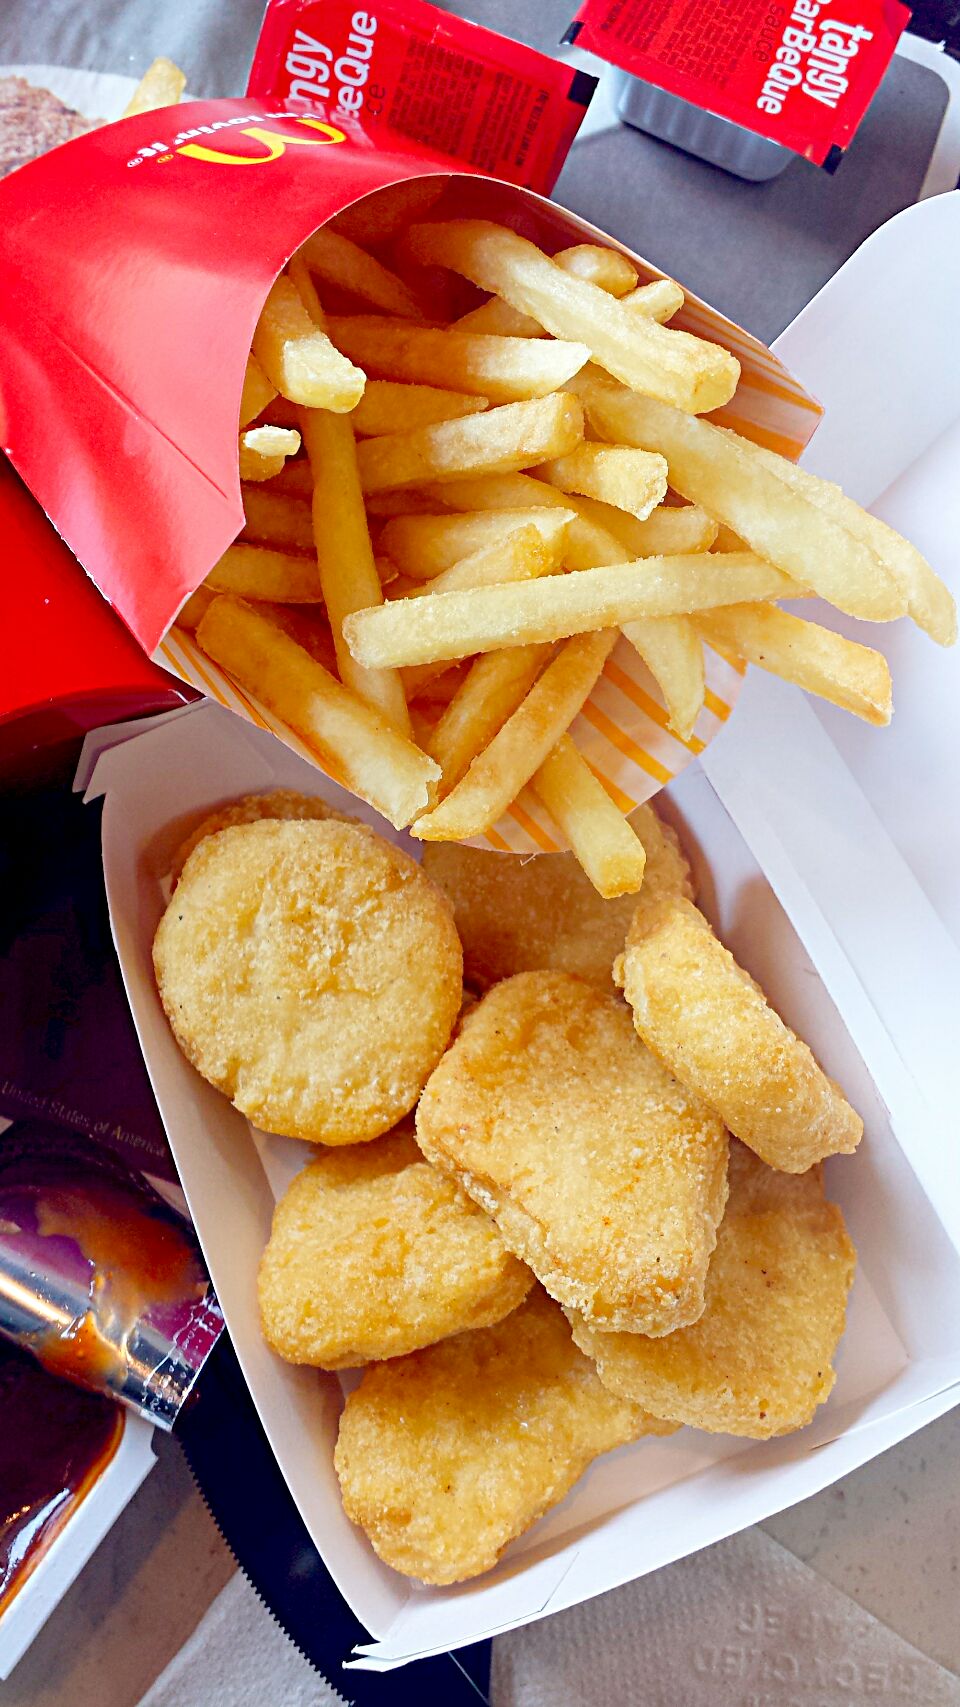 10pc chicken nuggets and fries 3/26